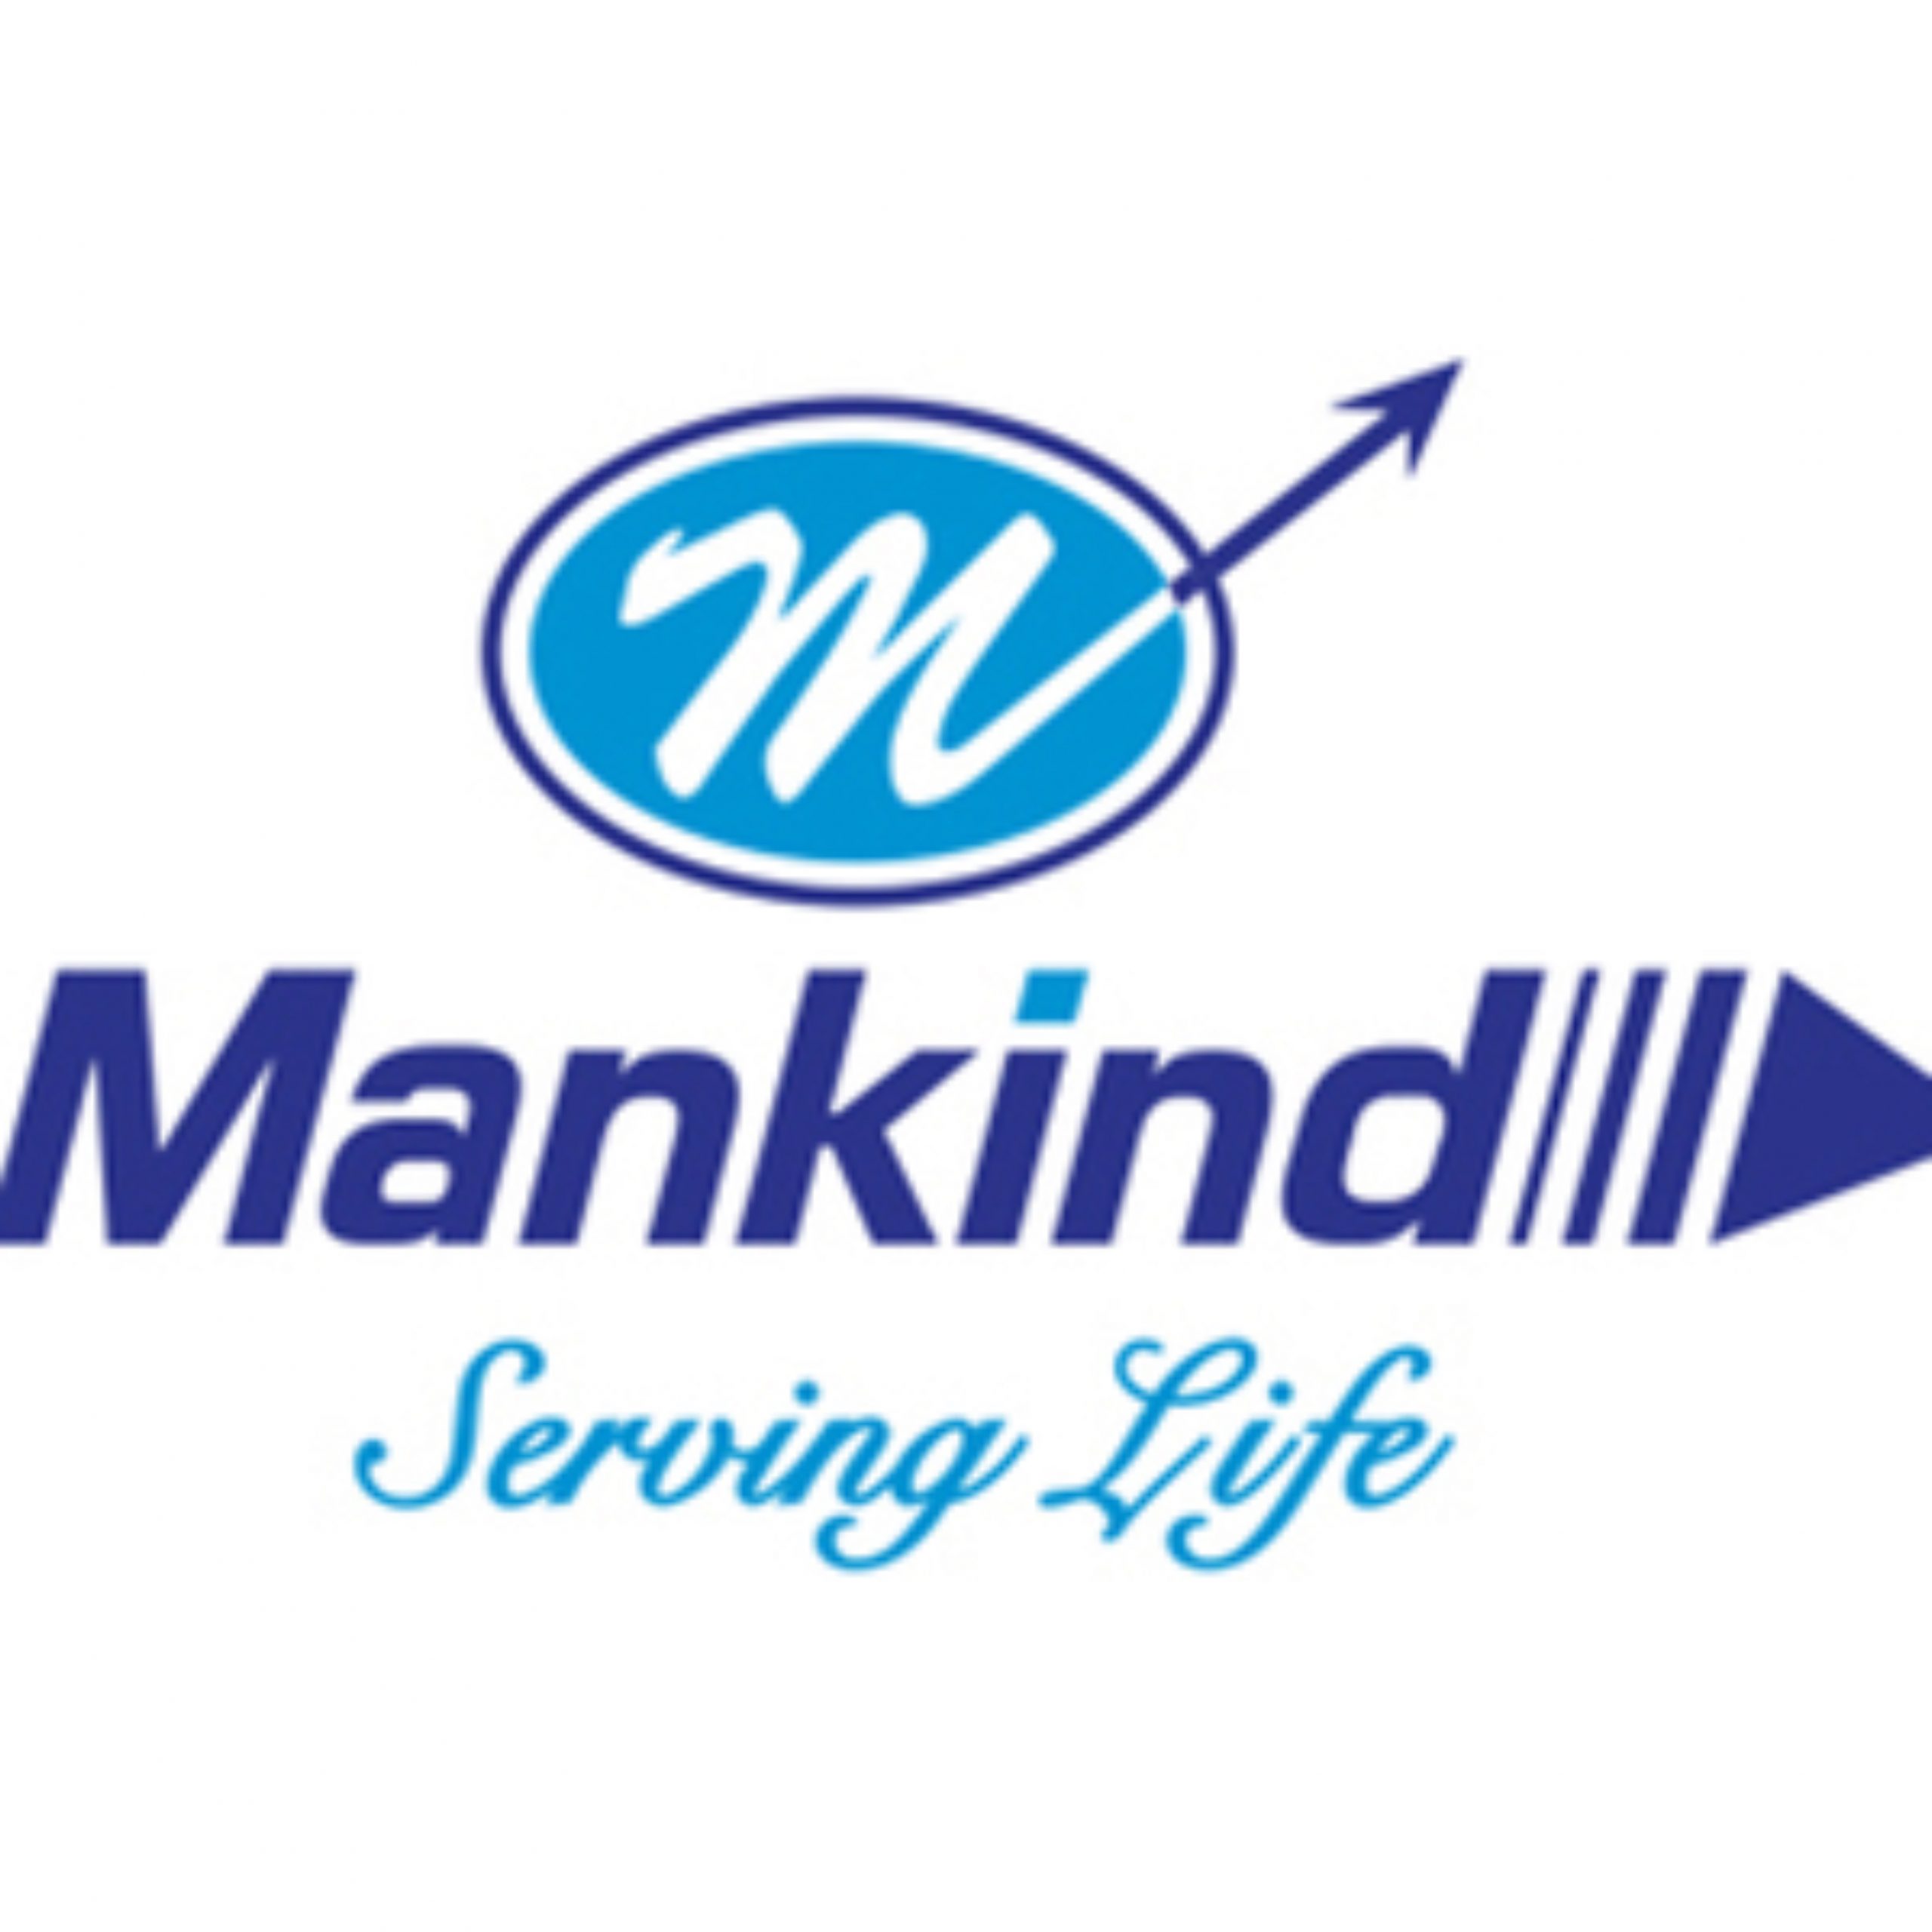 Mankind Pharma continues to serve life through unparalleled spirit of collaboration to fight Covid-19-thumnail